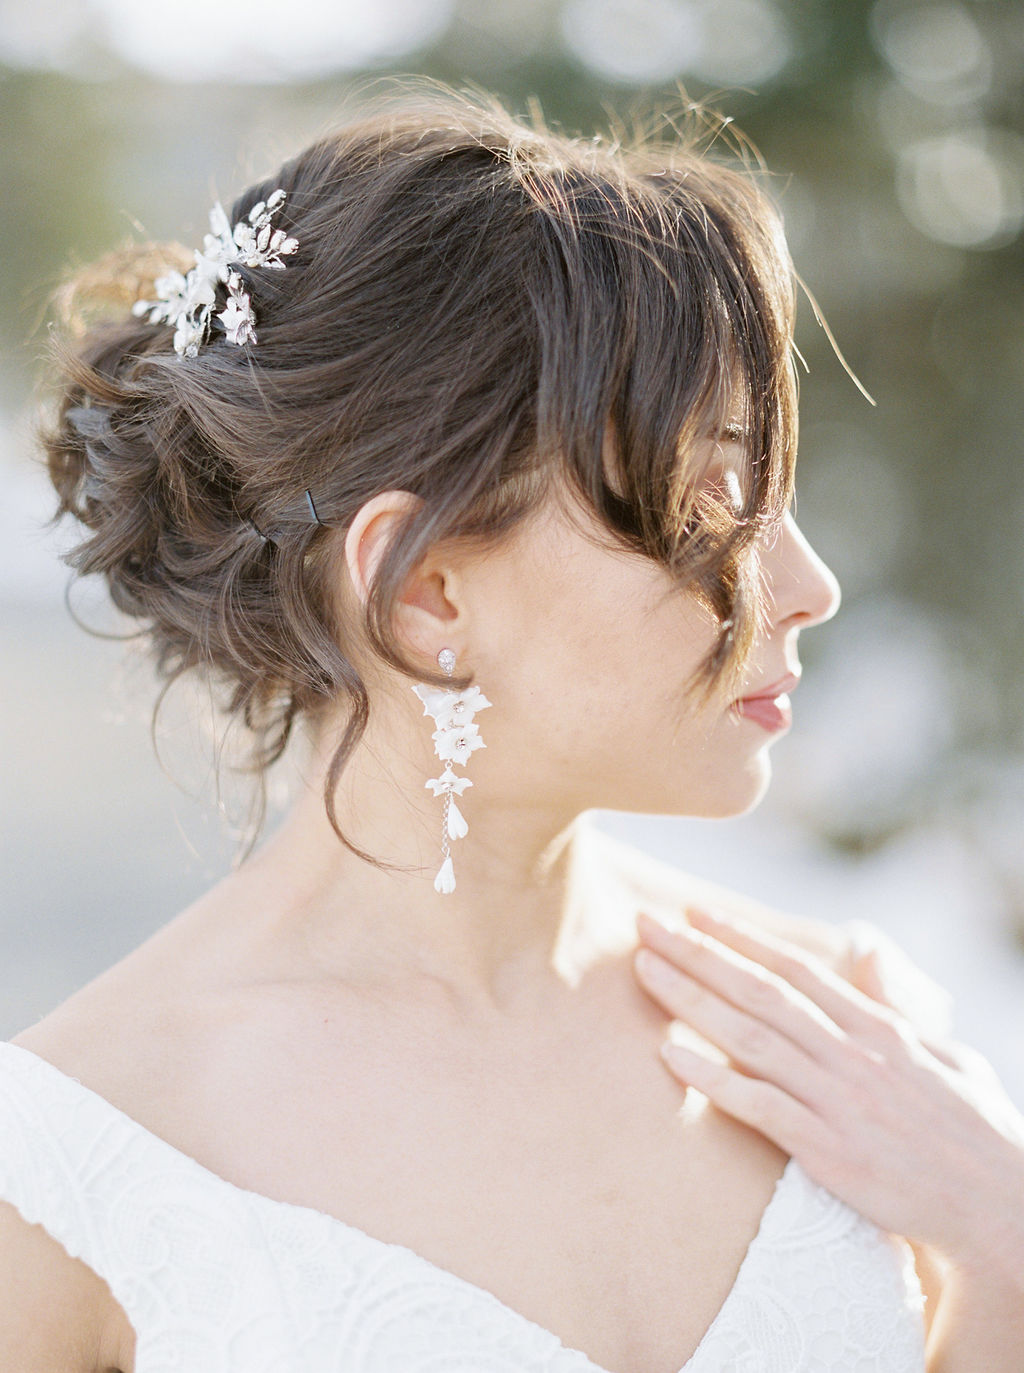 Classic bride with dark brown hair swpet back from her face, one curl in front of her face with a sparkling hair piece and drop earrings